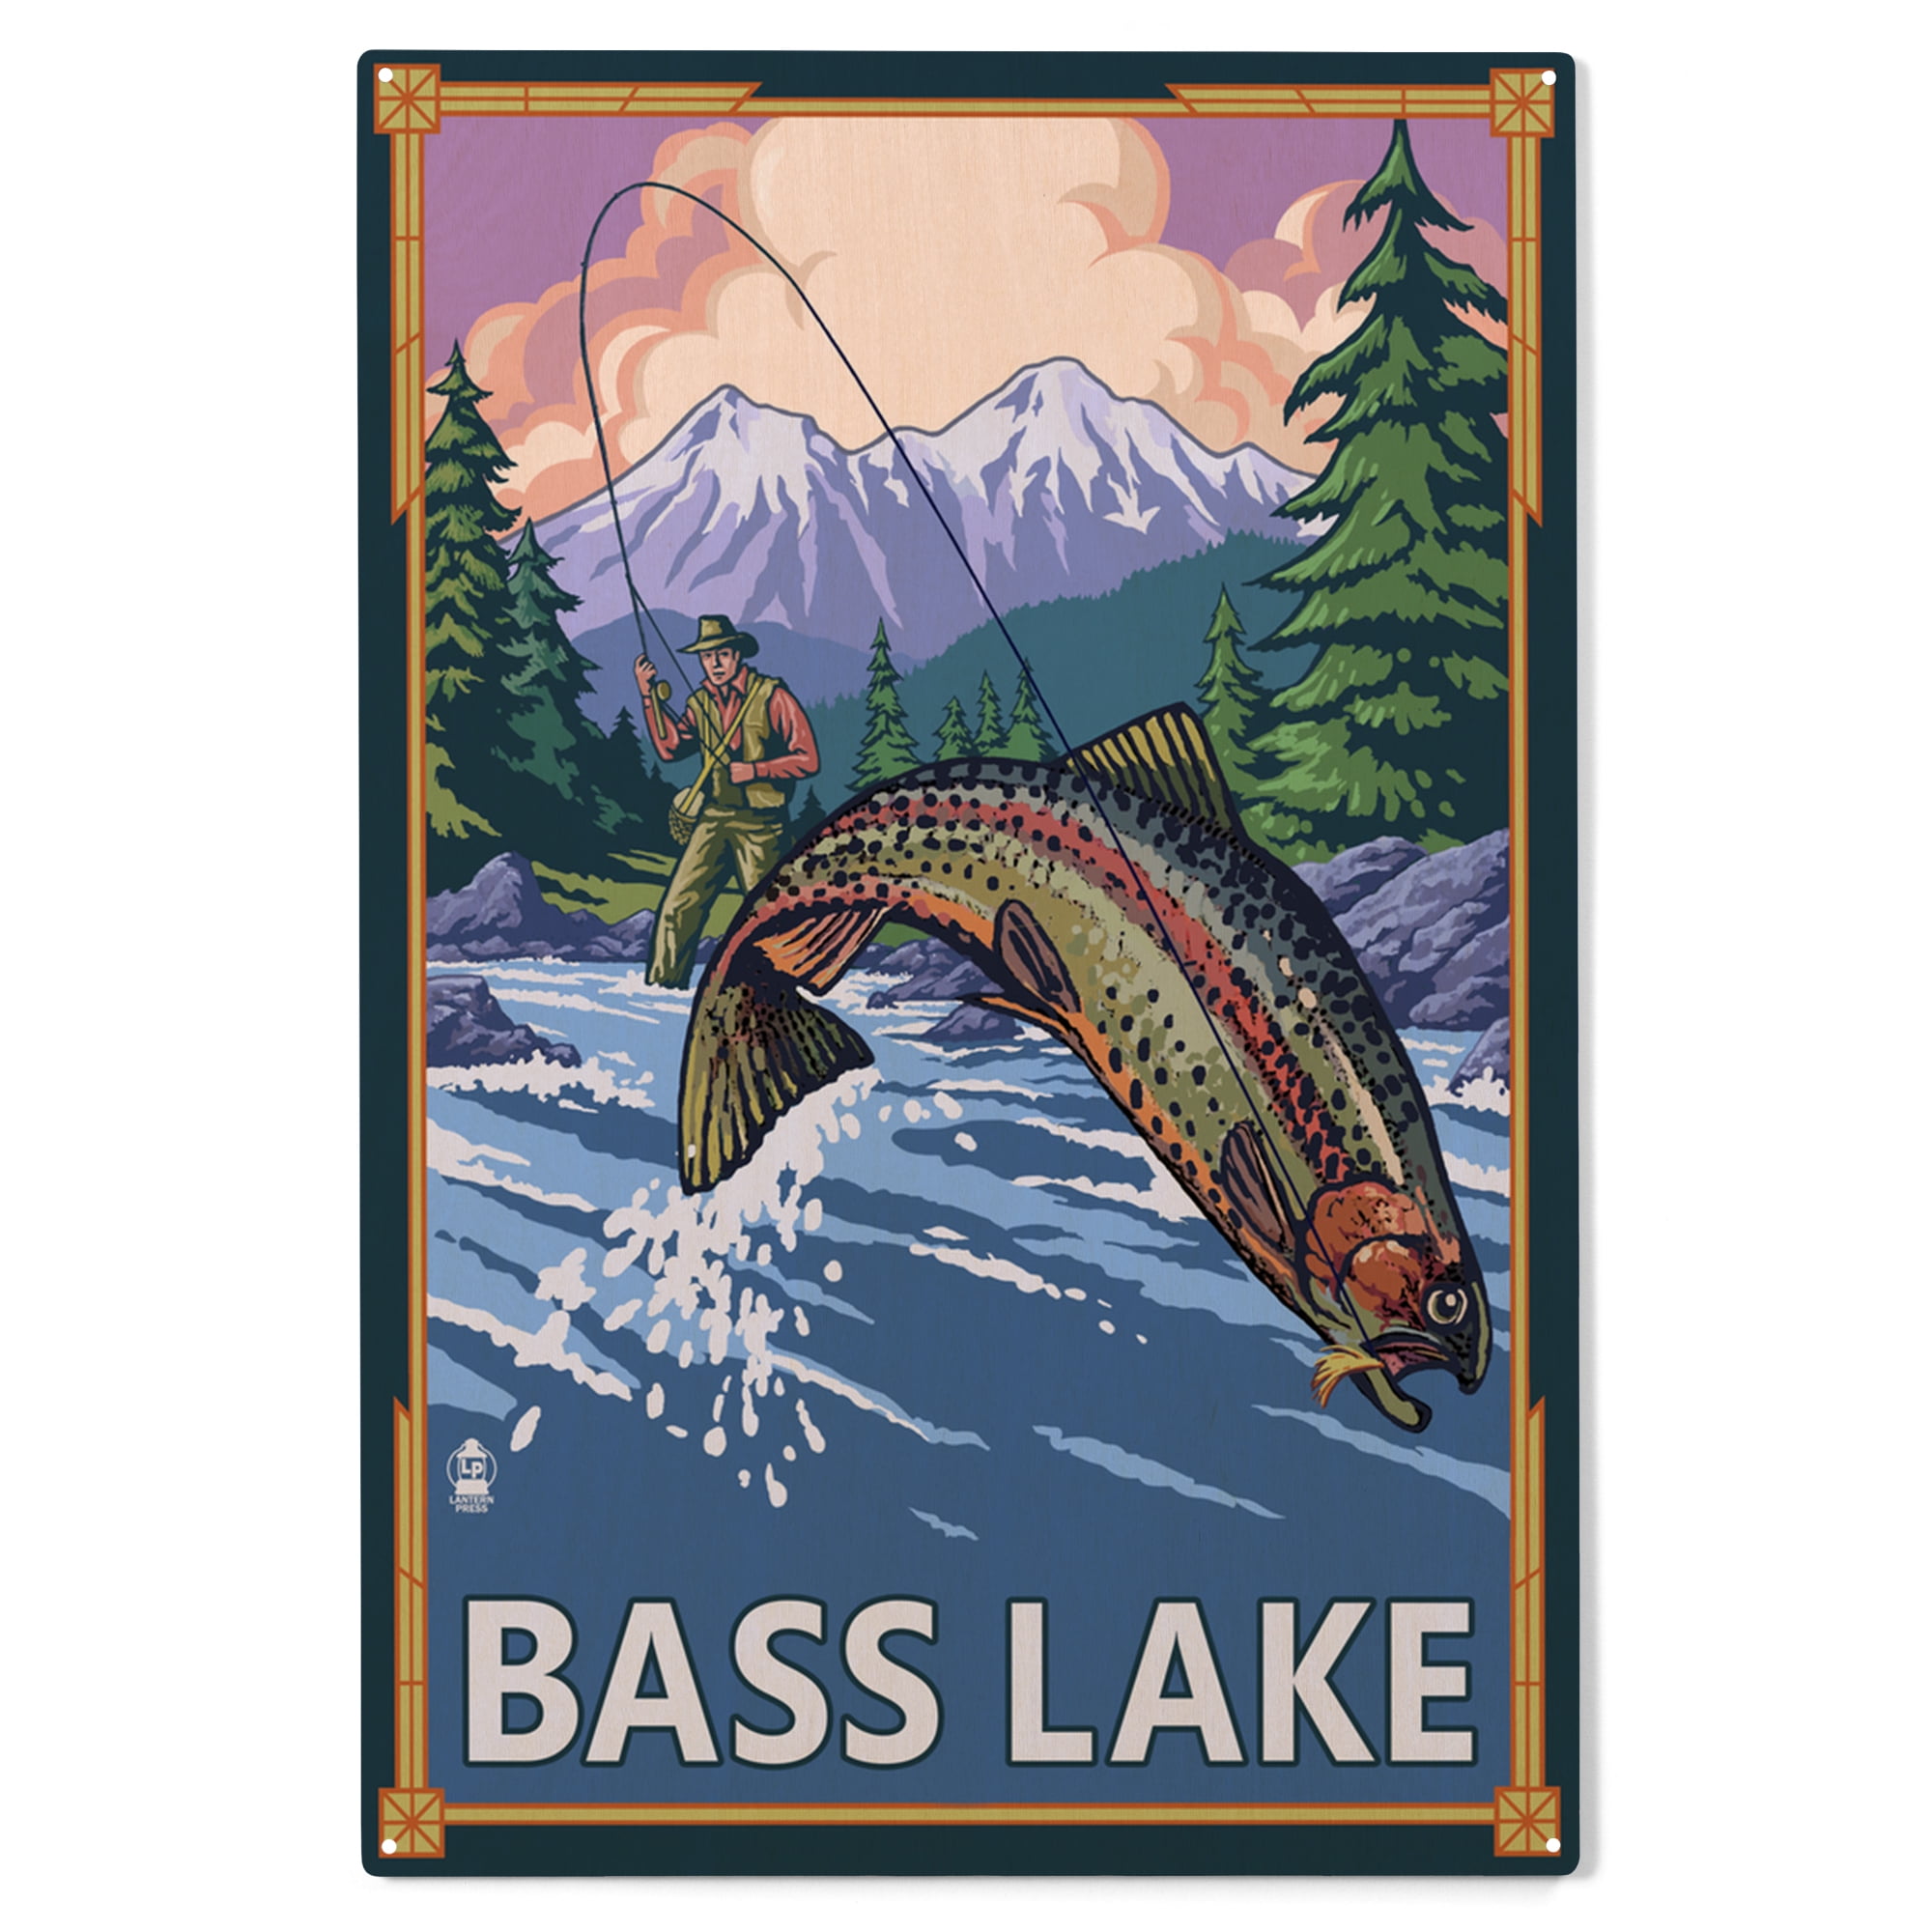 Bass Lake, California, Angler Fly Fishing Scene (Leaping Trout) Birch Wood  Wall Sign (6x9 Rustic Home Decor, Ready to Hang Art) 